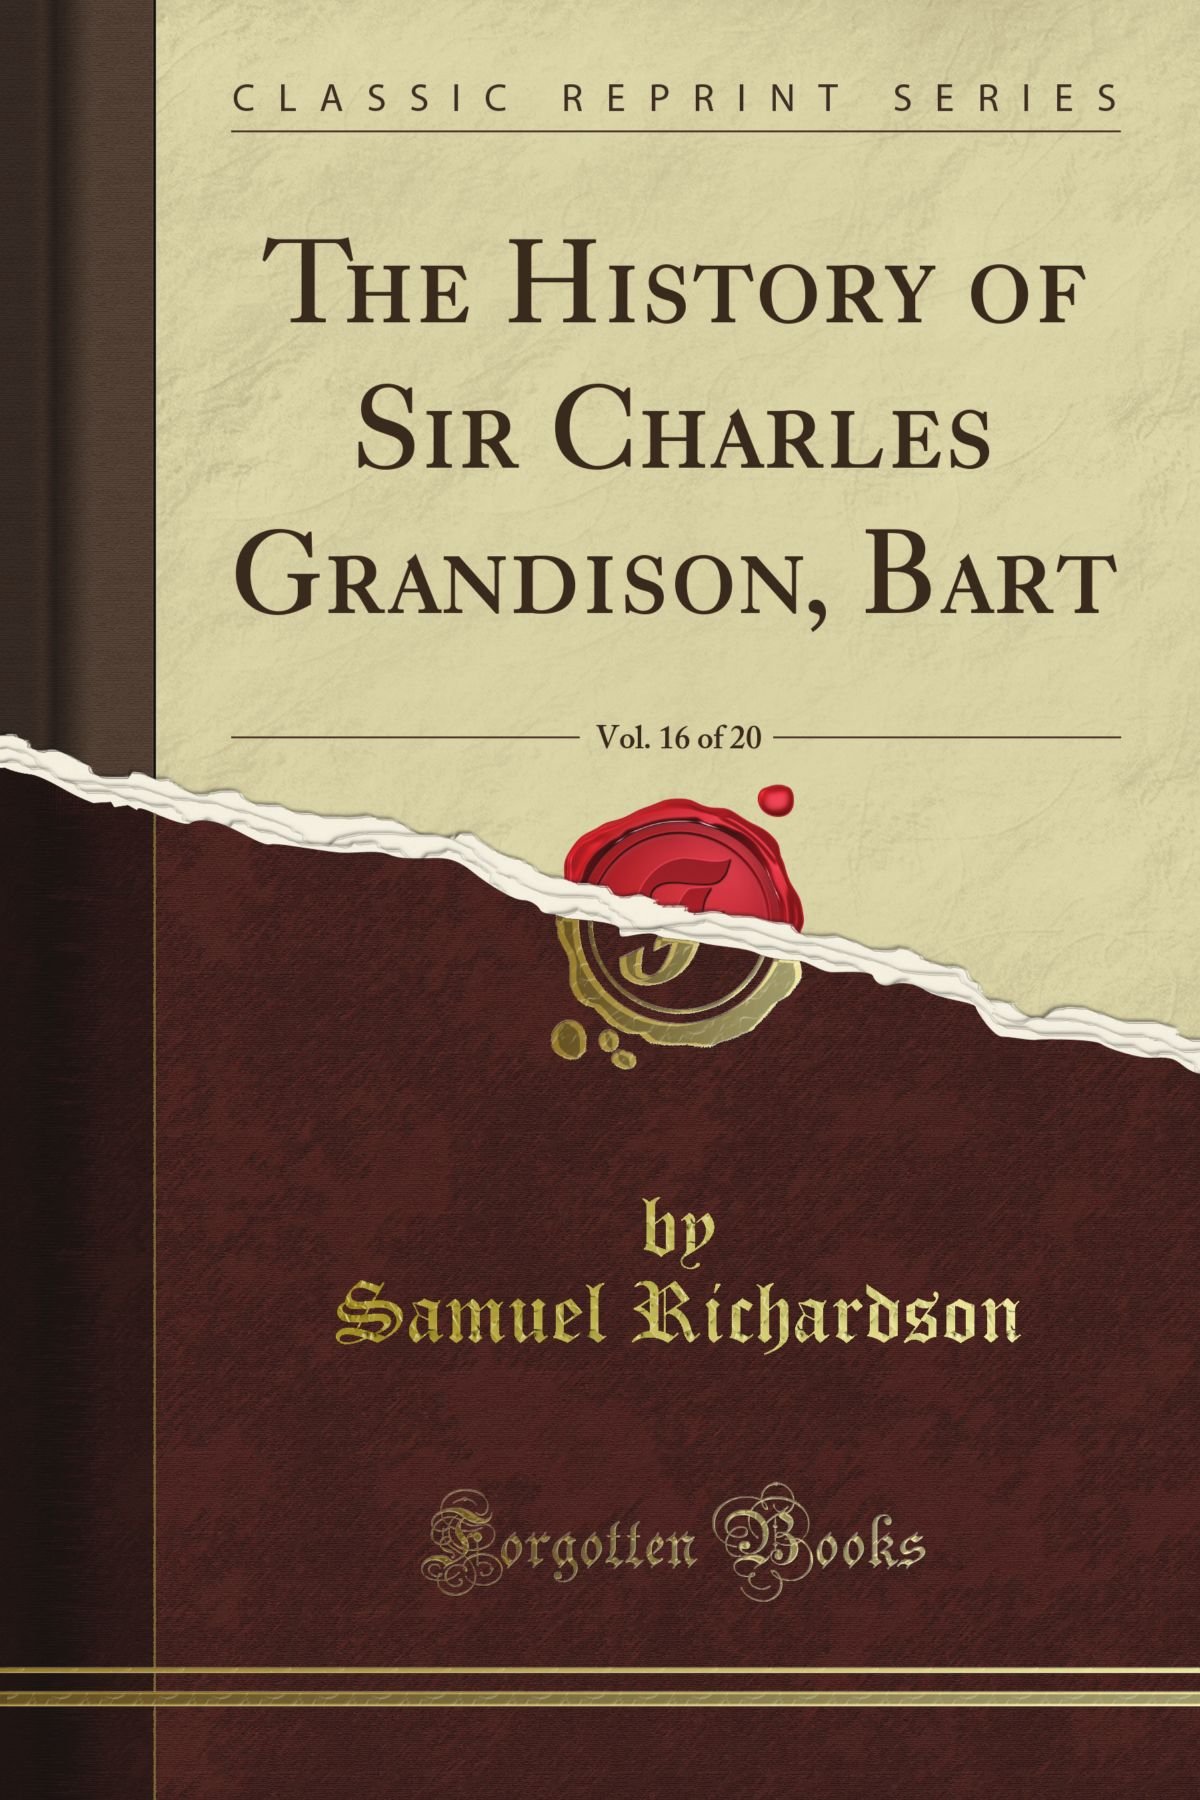 The History Of Sir Charles Grandison Bart